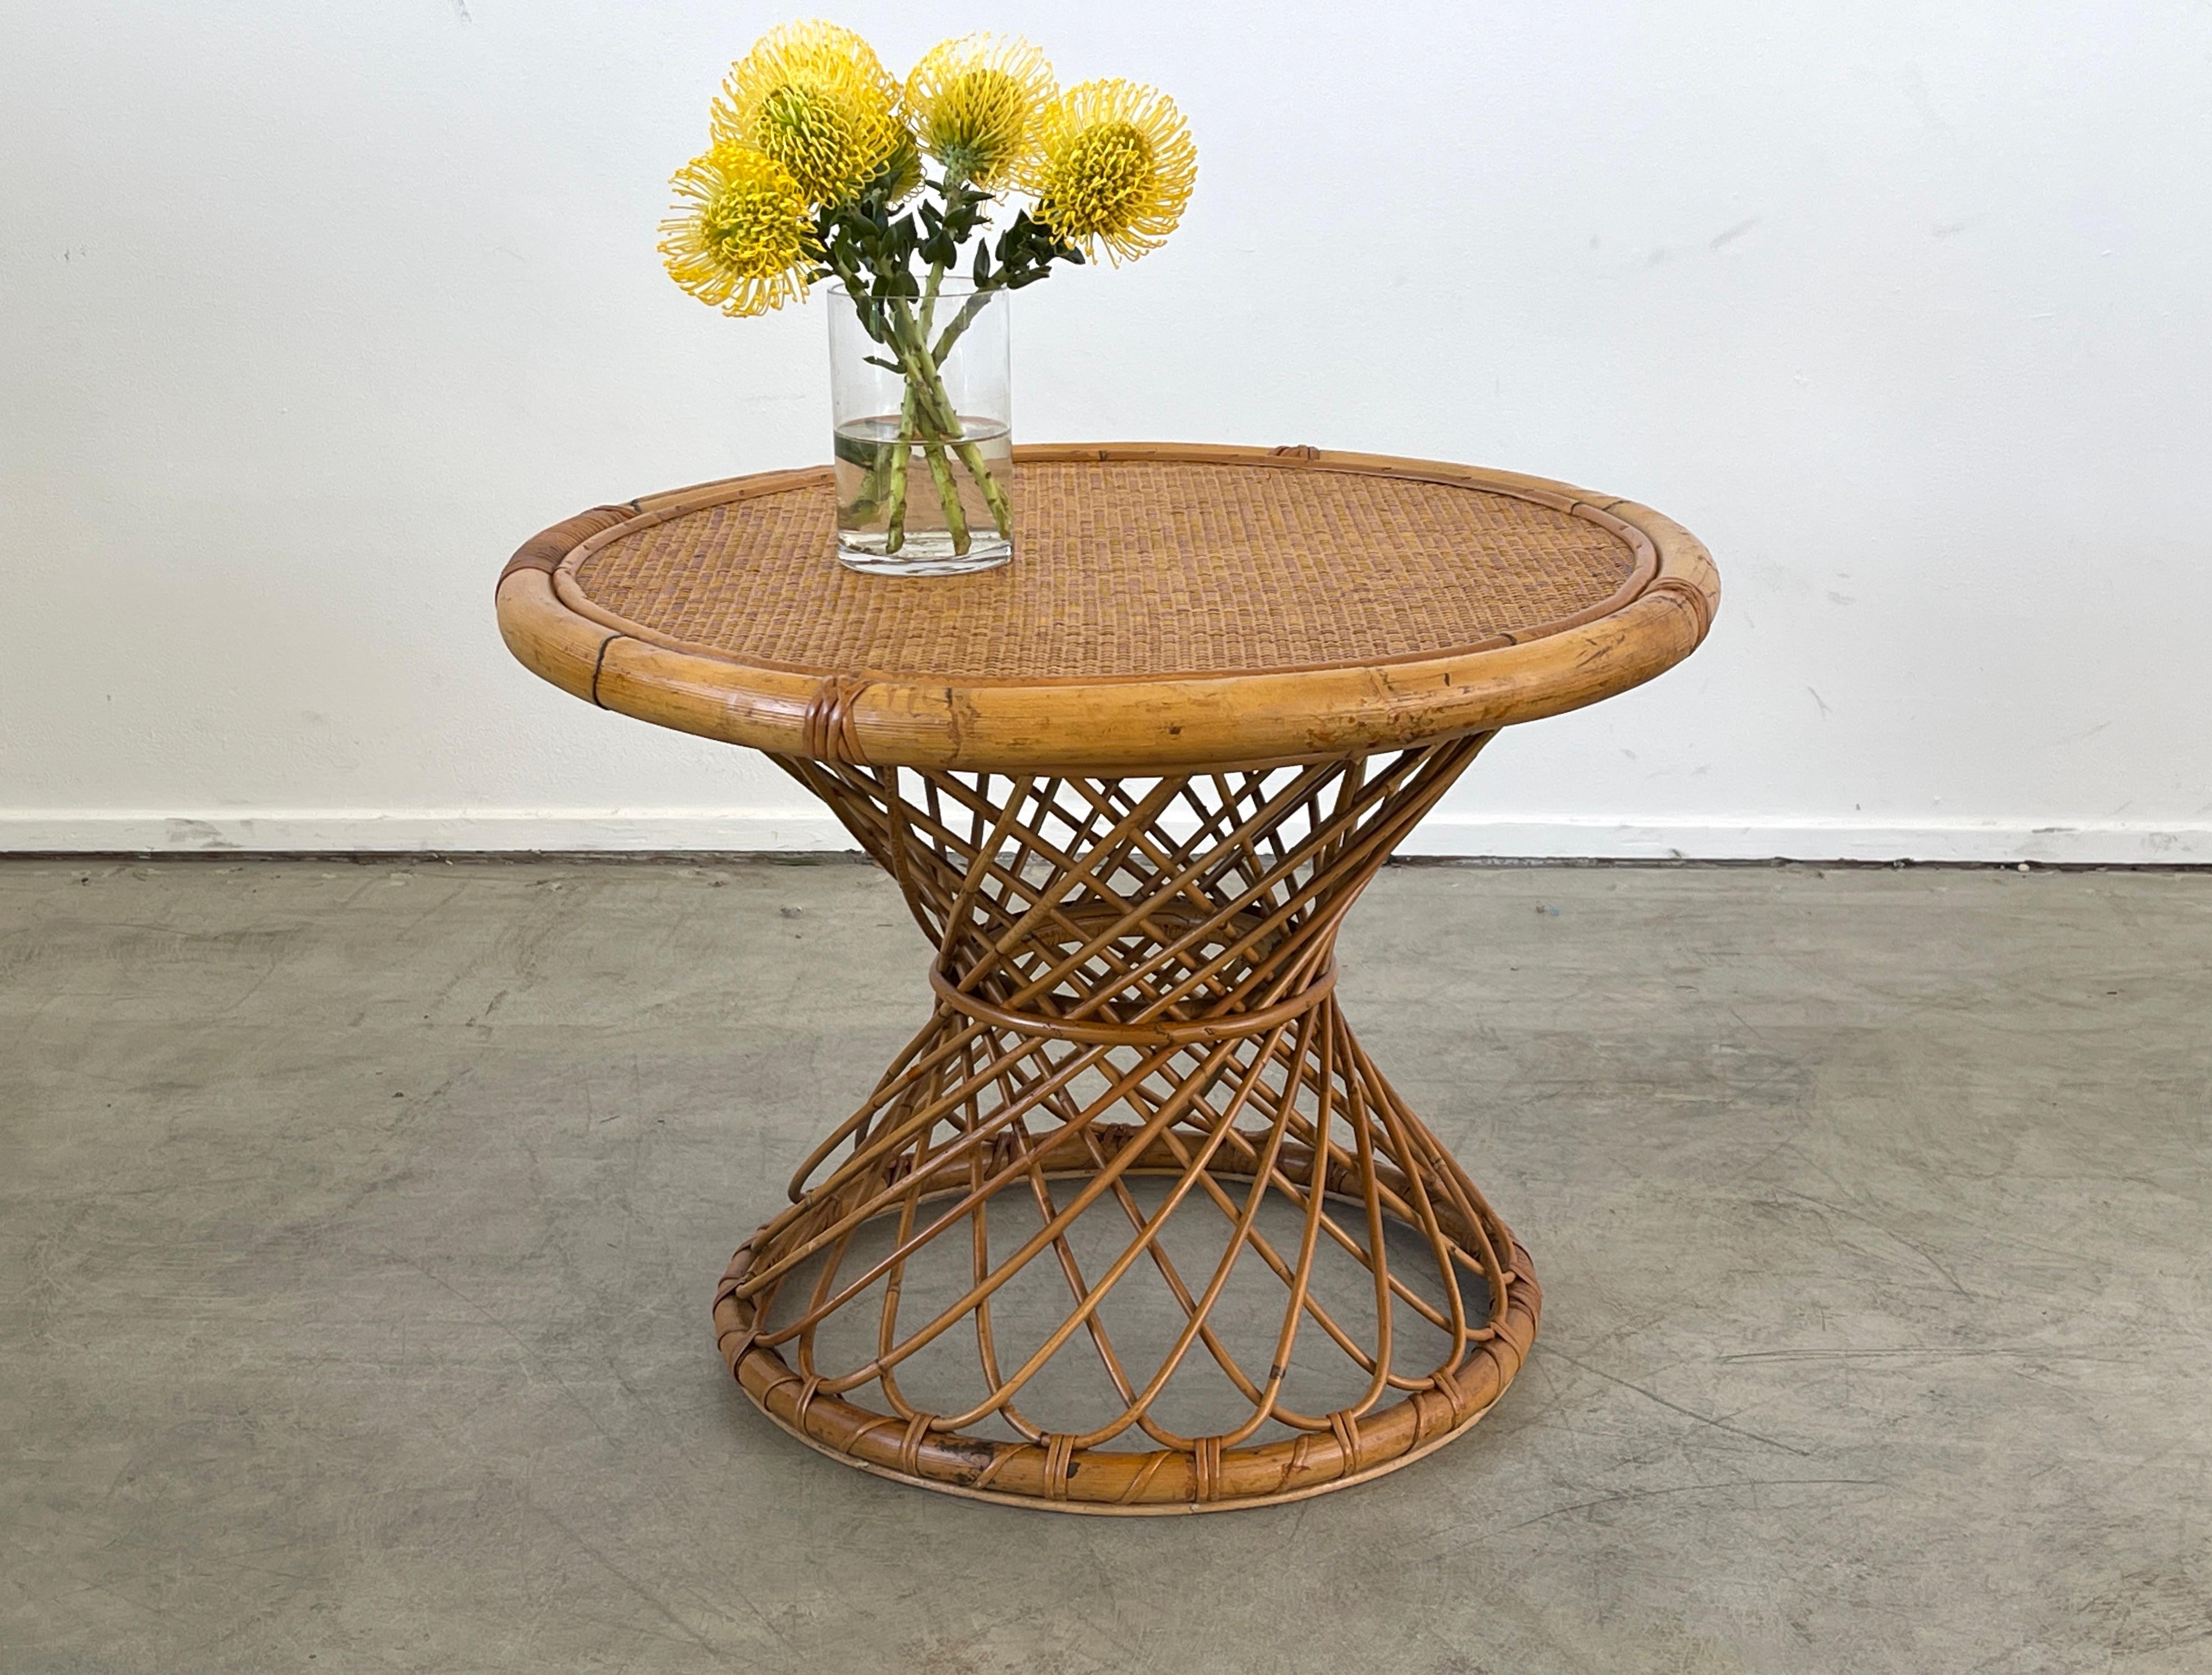 Unique Italian 1950's bamboo coffee table.
Tulip shaped base with twisted rattan and wicker table surface. 
Great patina. 
Great design.